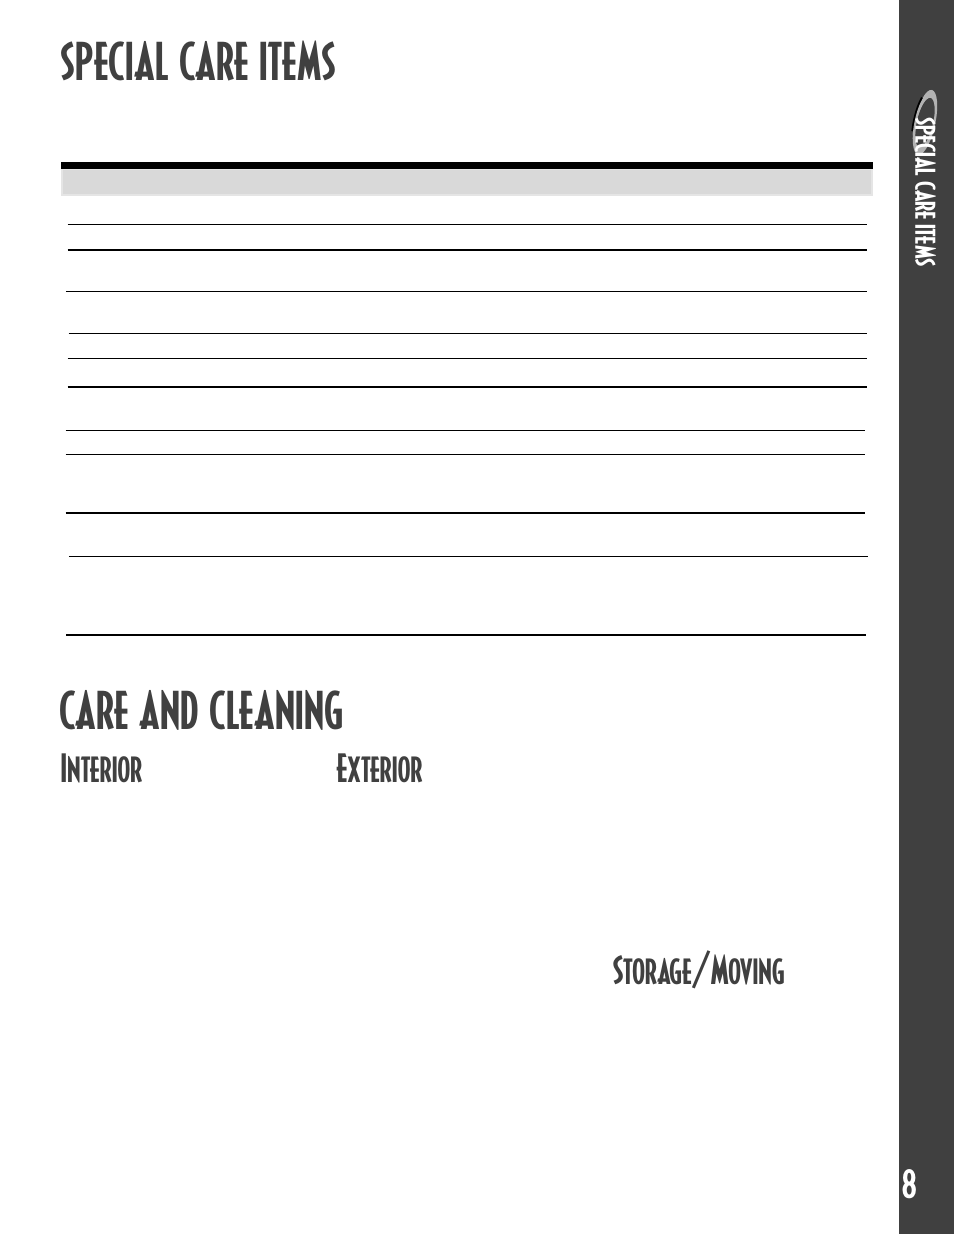 Special care items, Care and cleaning, Interior | Exterior, Storage/moving, Sp ecial c a re it em s | Maytag MDB6657AWB User Manual | Page 9 / 36